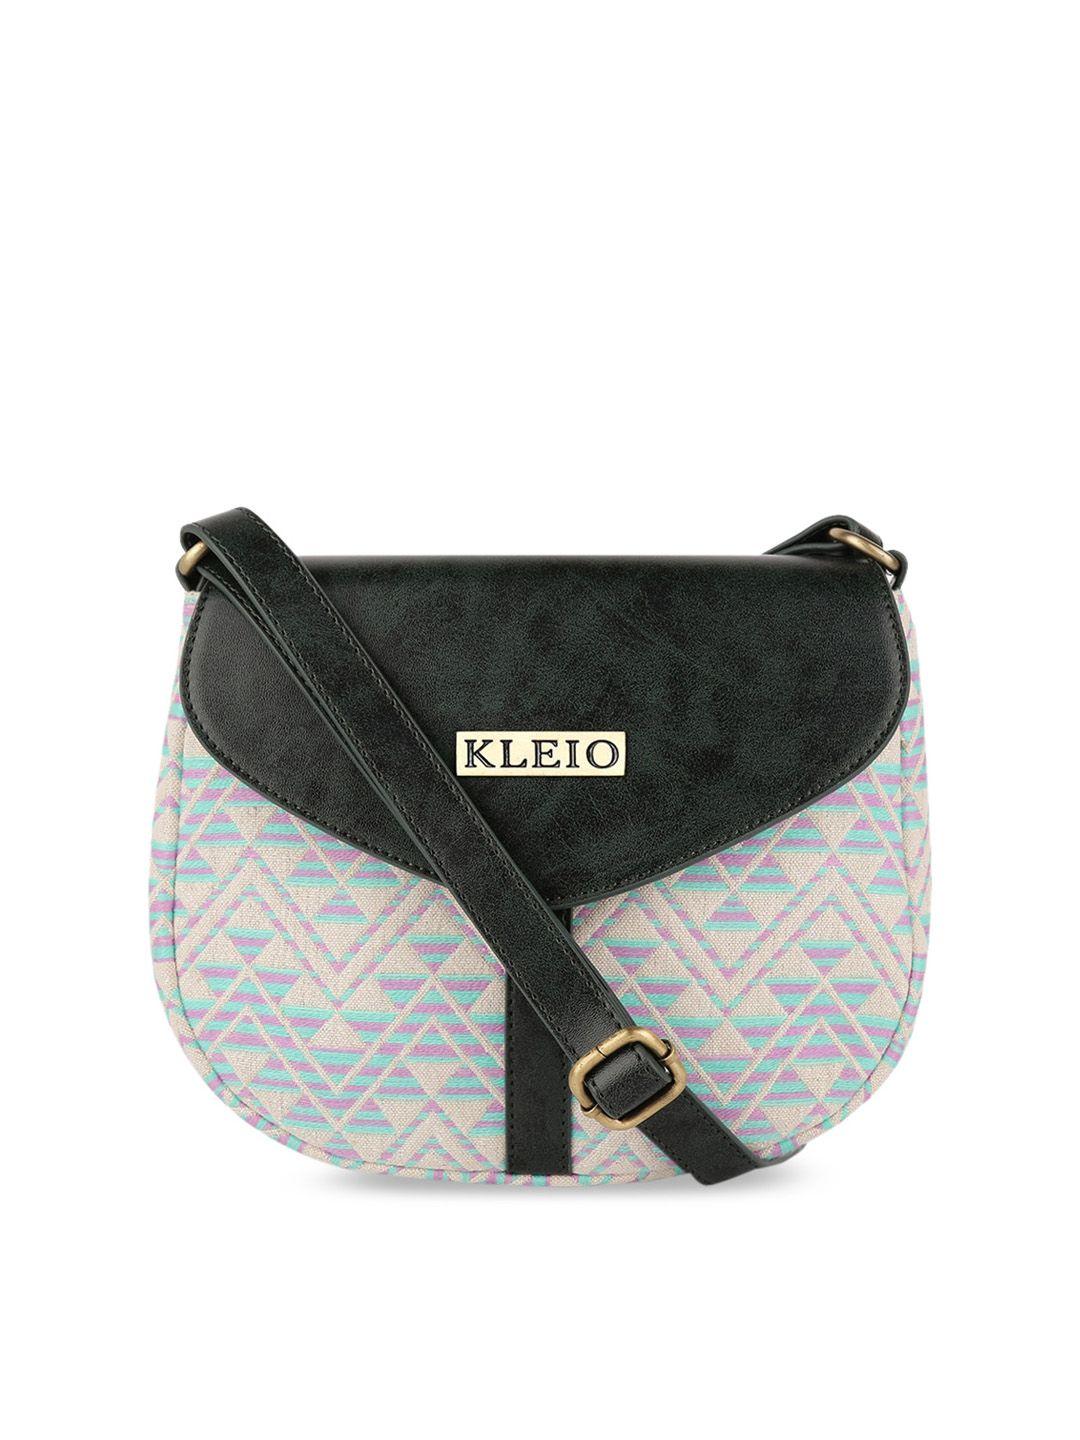 kleio olive green geometric printed pu structured jacquard sling bag with quilted